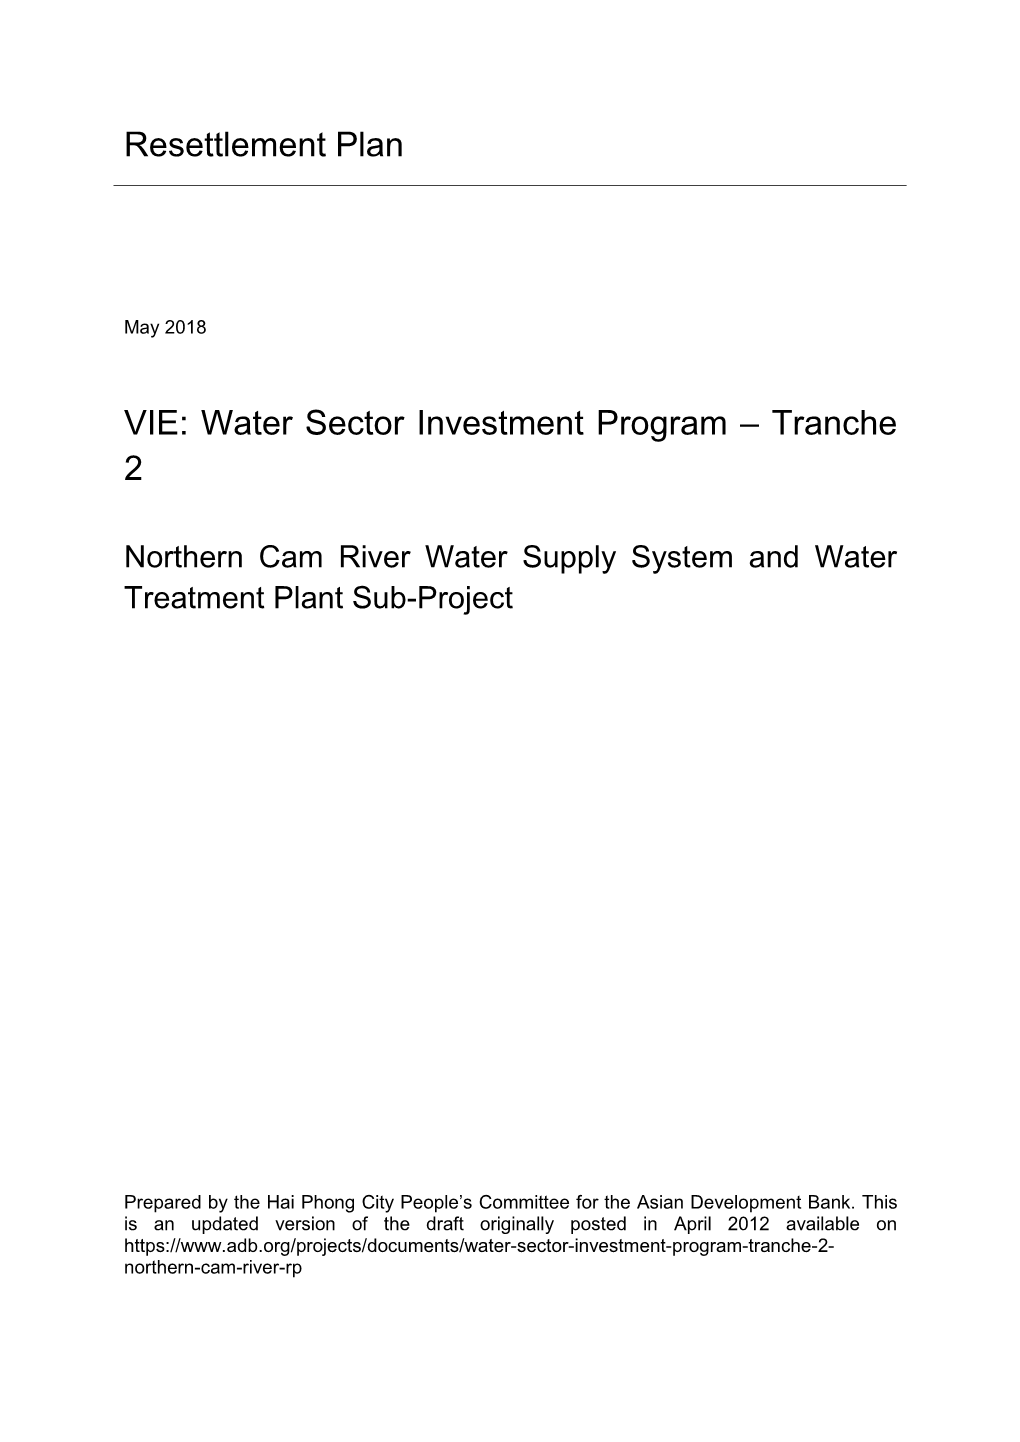 41456-033: Water Sector Investment Program